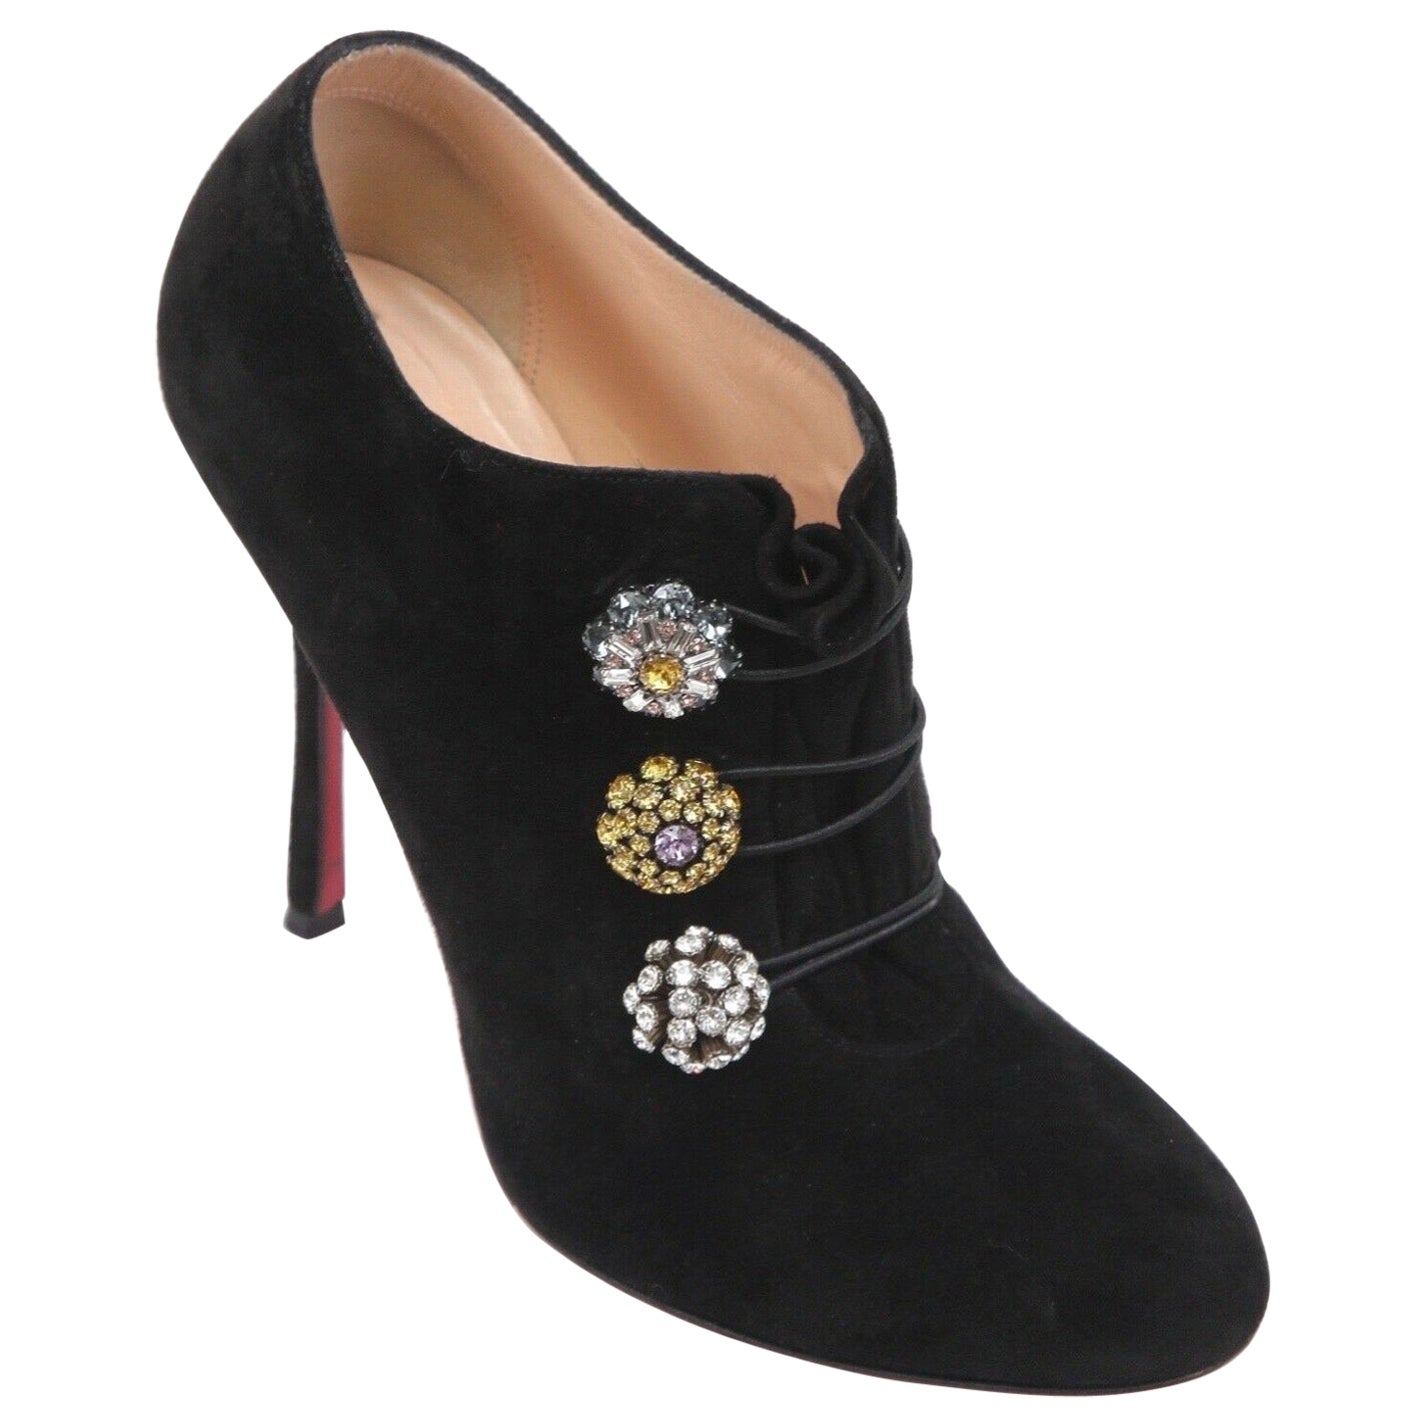 CHRISTIAN LOUBOUTIN Black Suede Ankle Boot BOOTONI MJ Leather Crystals Sz 38